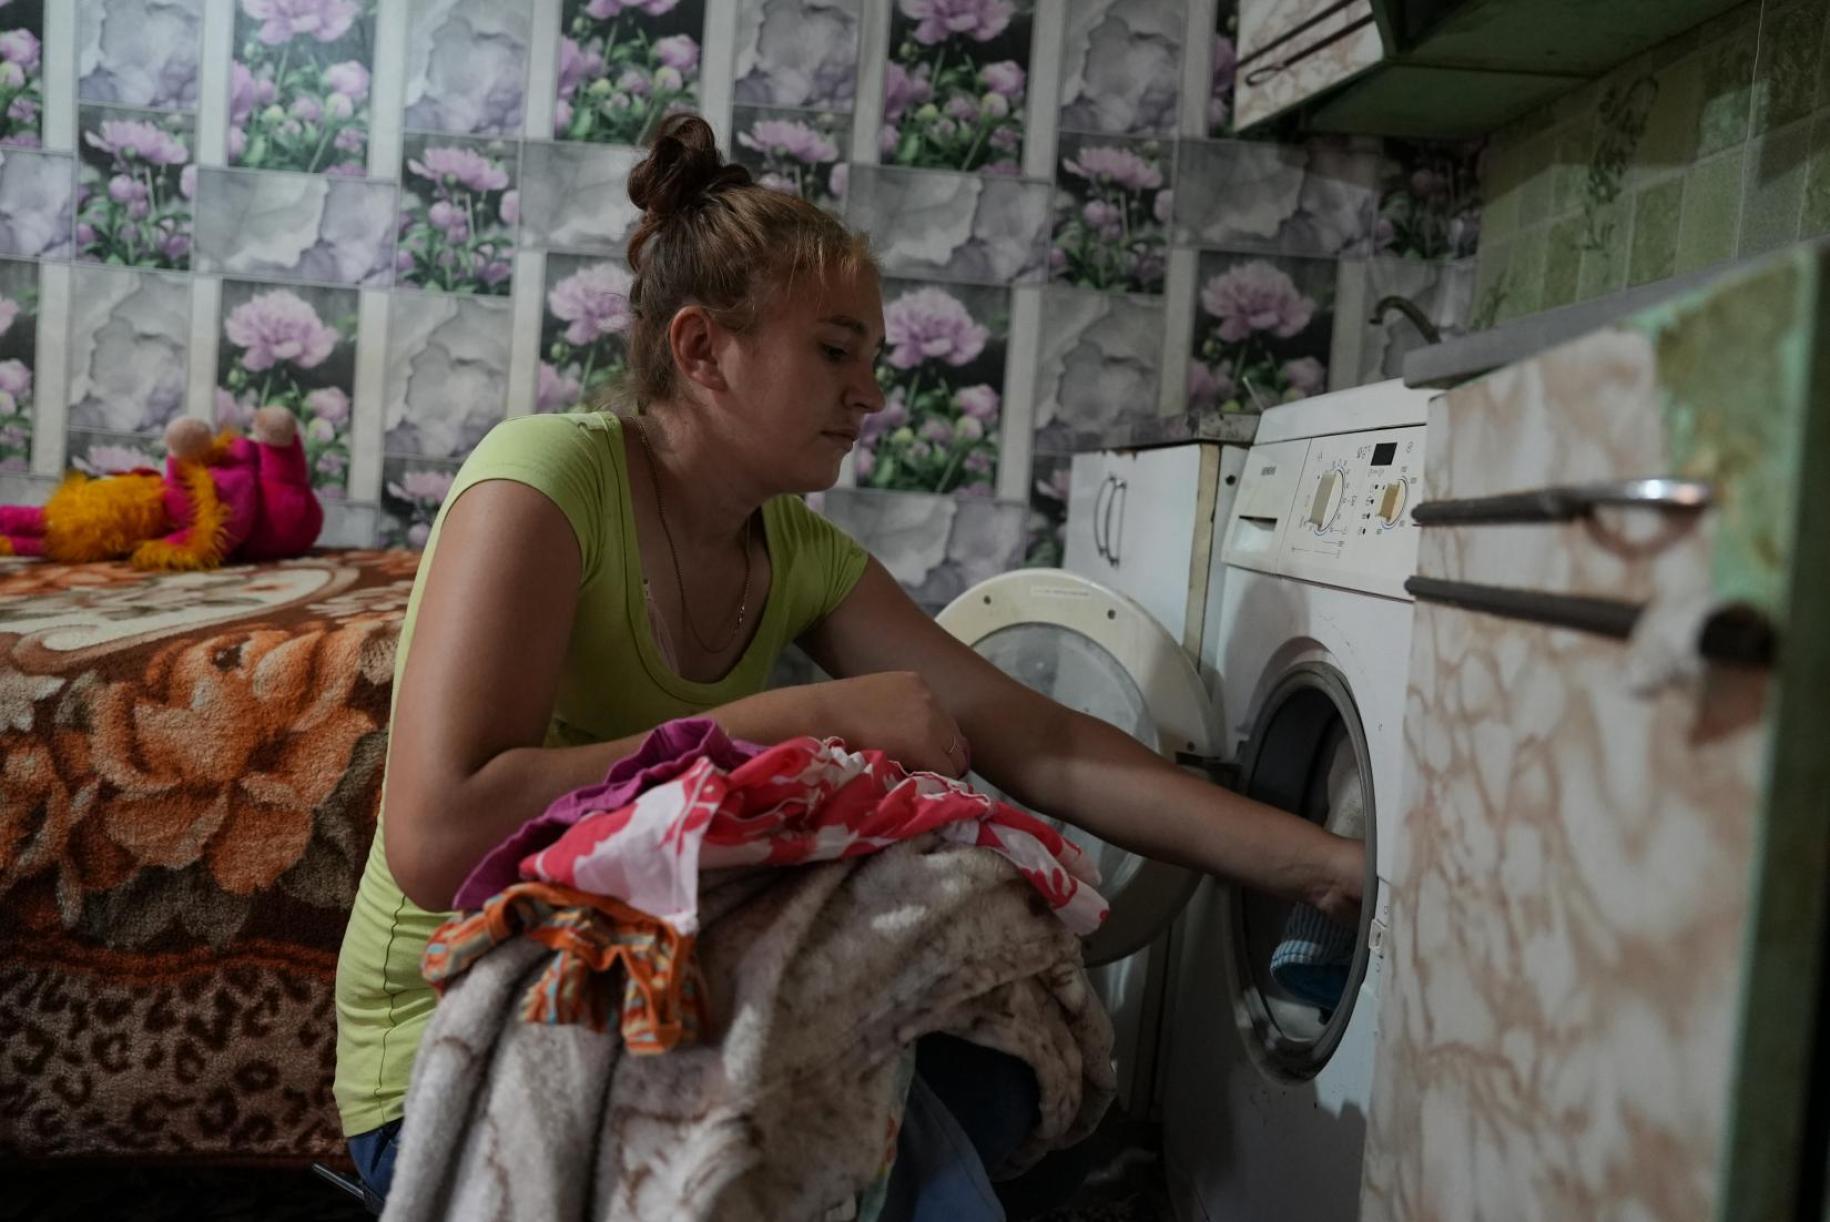 A woman puts clothes into a washing machine in a lightly-lit room.